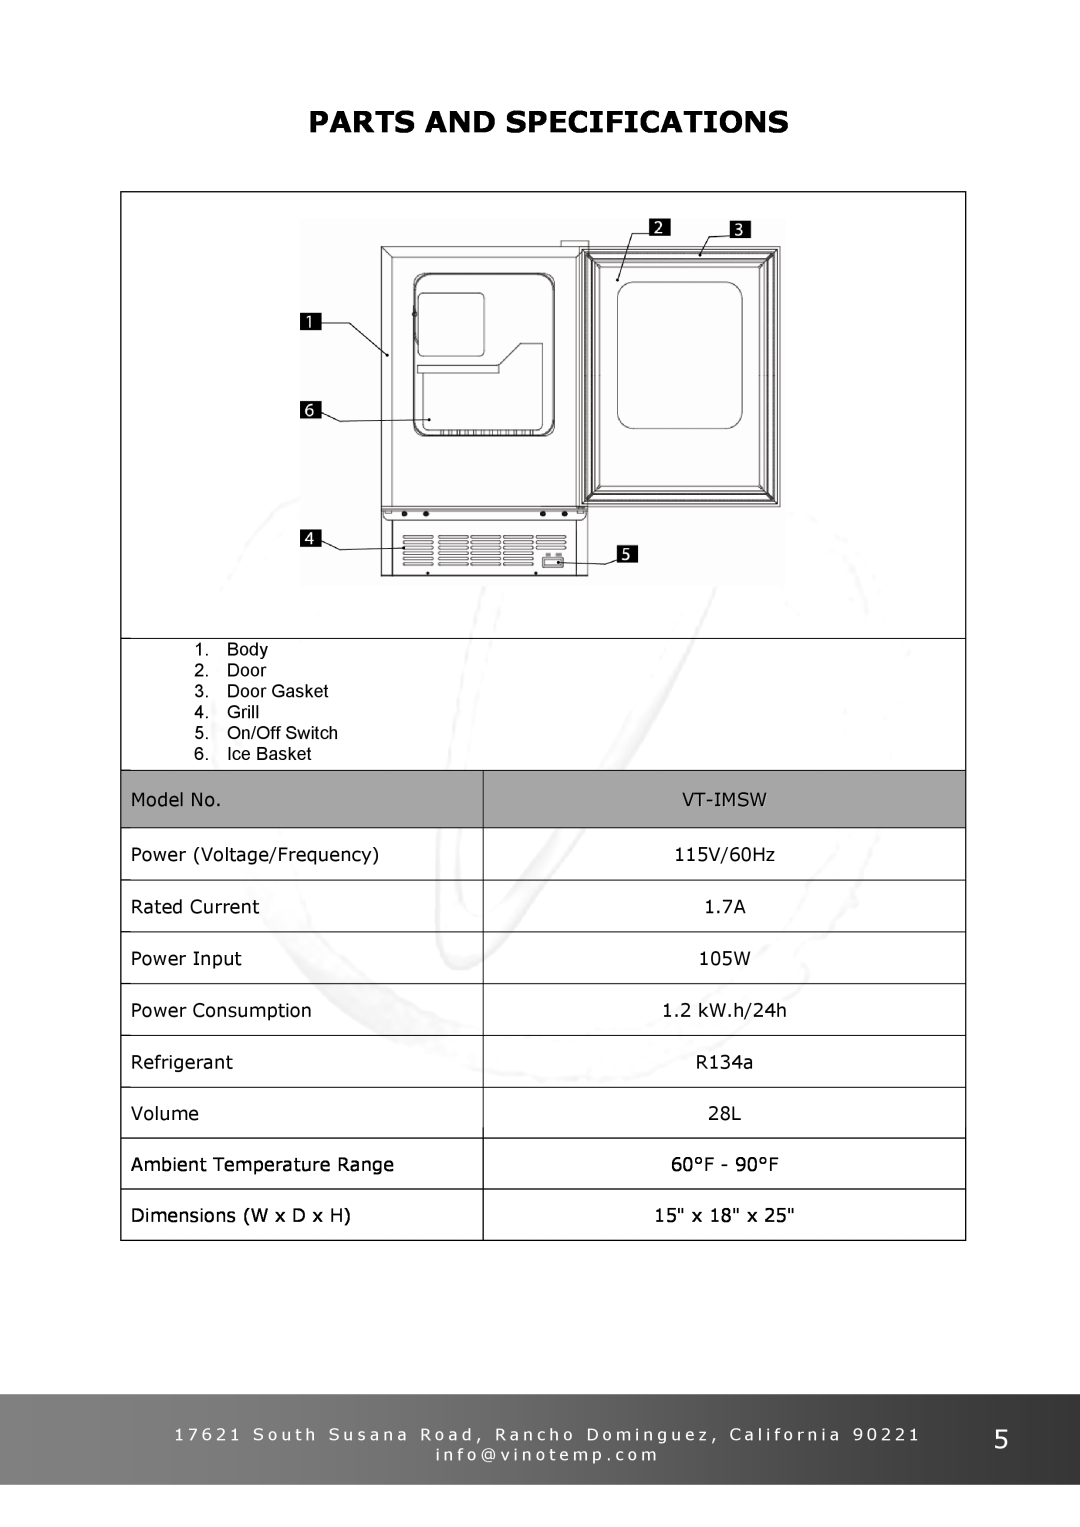 Vinotemp VT - IMSW owner manual Parts And Specifications 